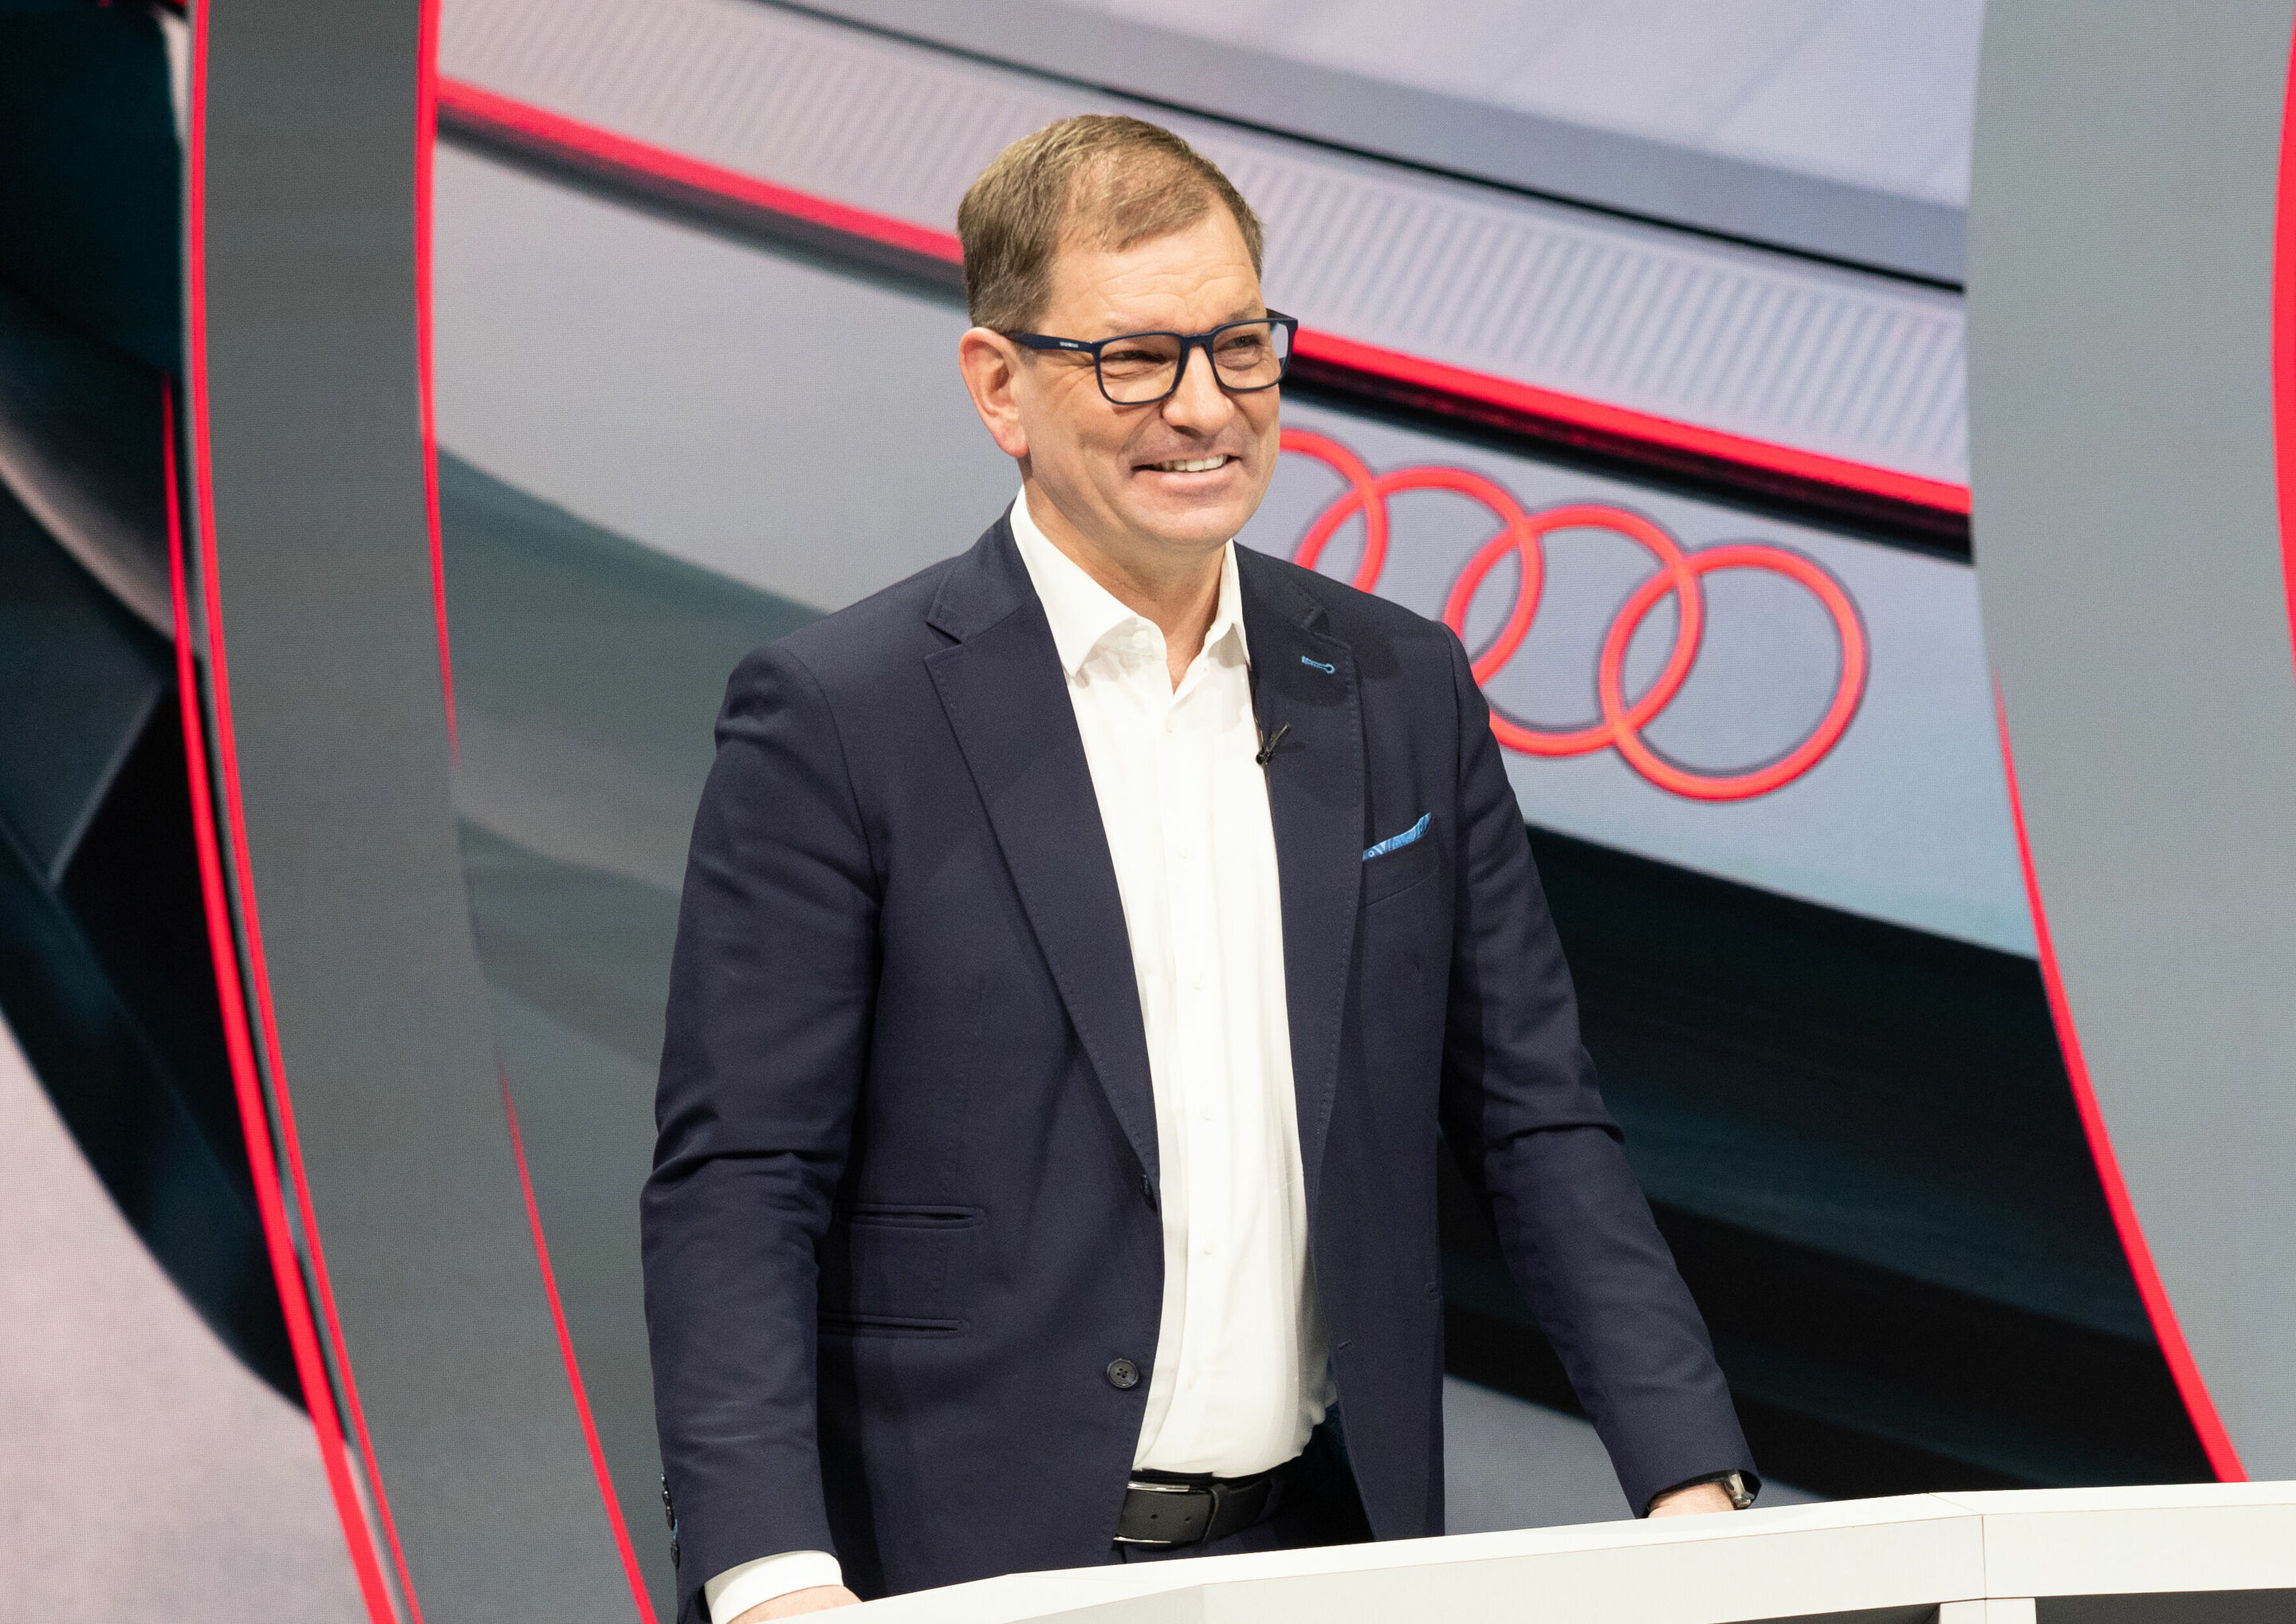 Annual Media Conference AUDI AG 2023